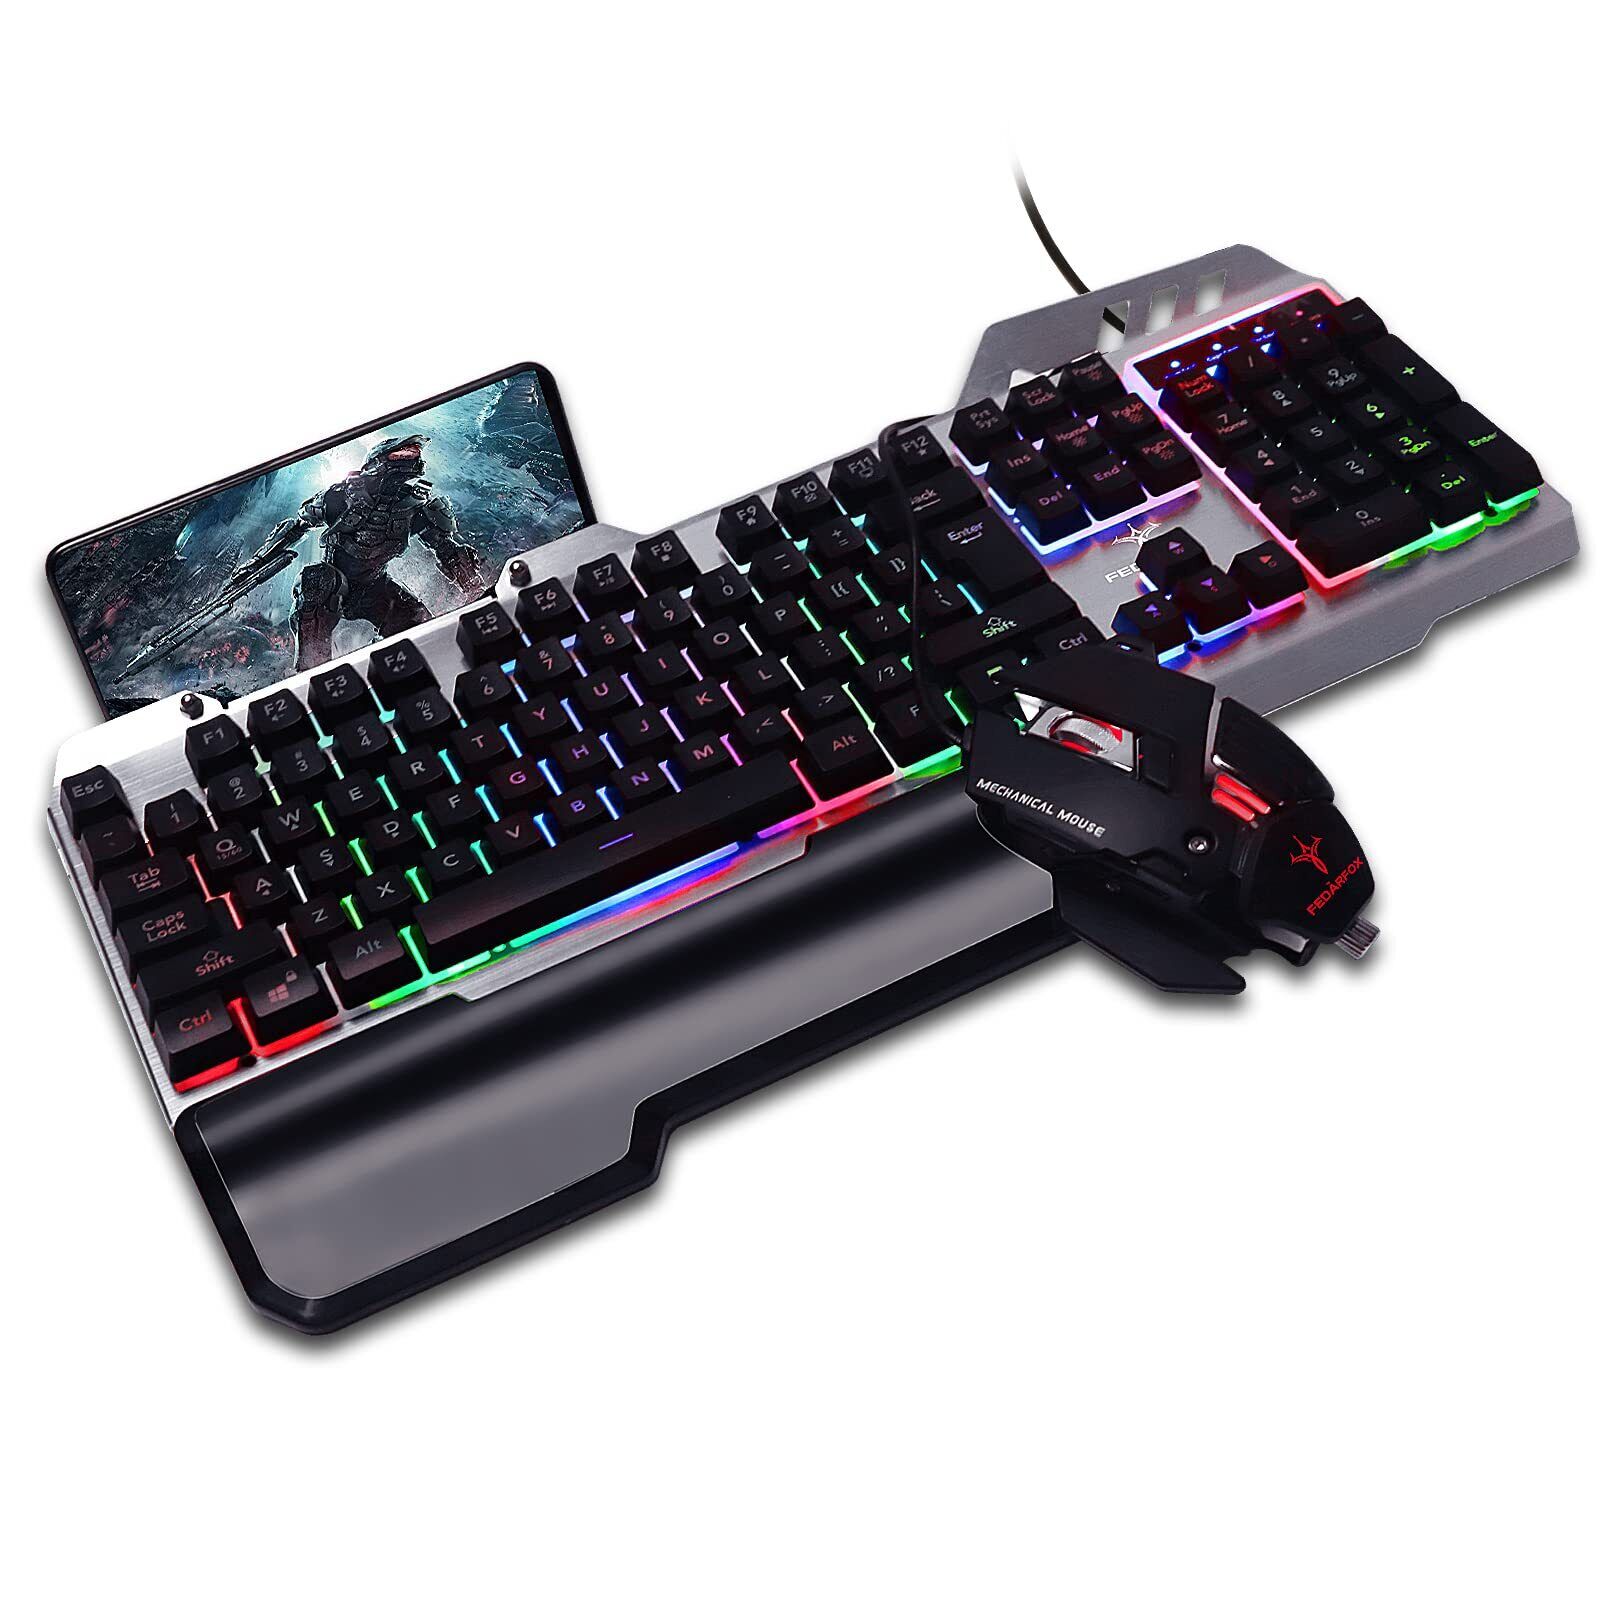 Keyboard and Mouse Combo, Compact Full Size Gaming Rainbow Keyboard and Mouse...